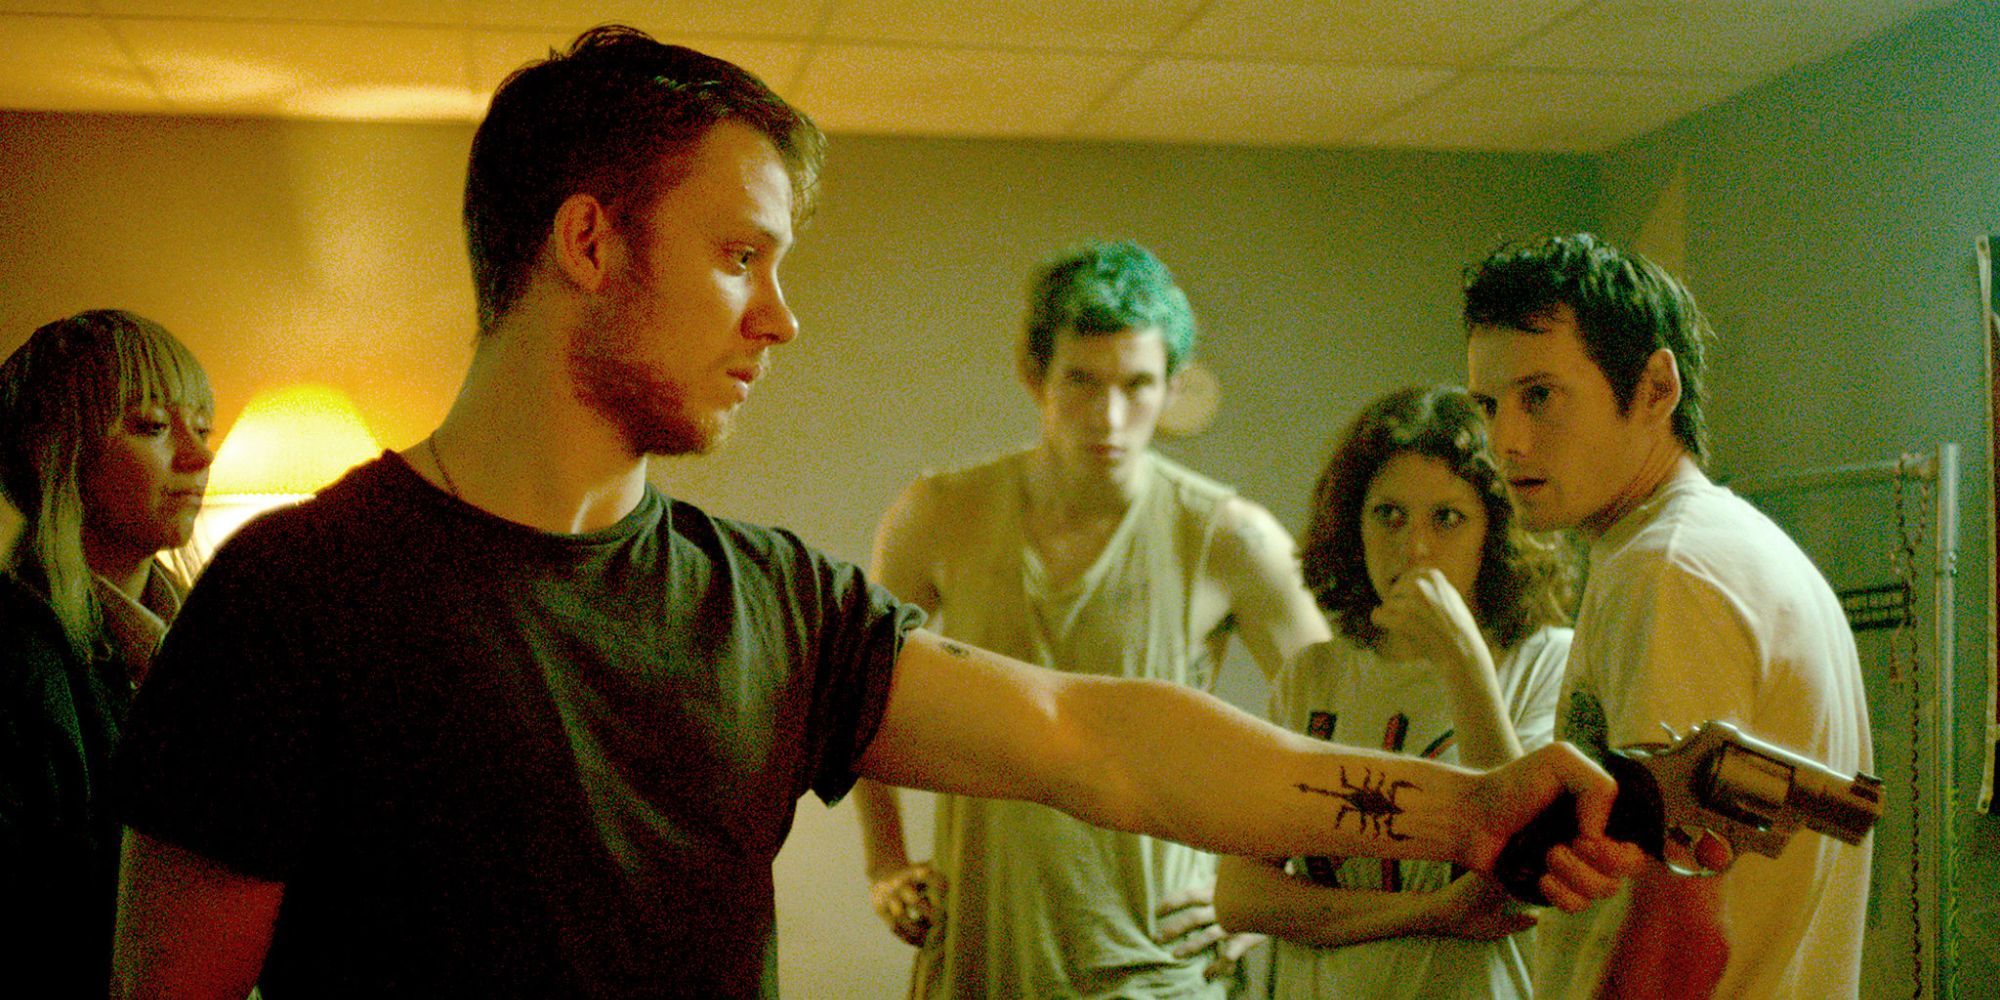 A young man points a gun at someone while three others look on in Green Room